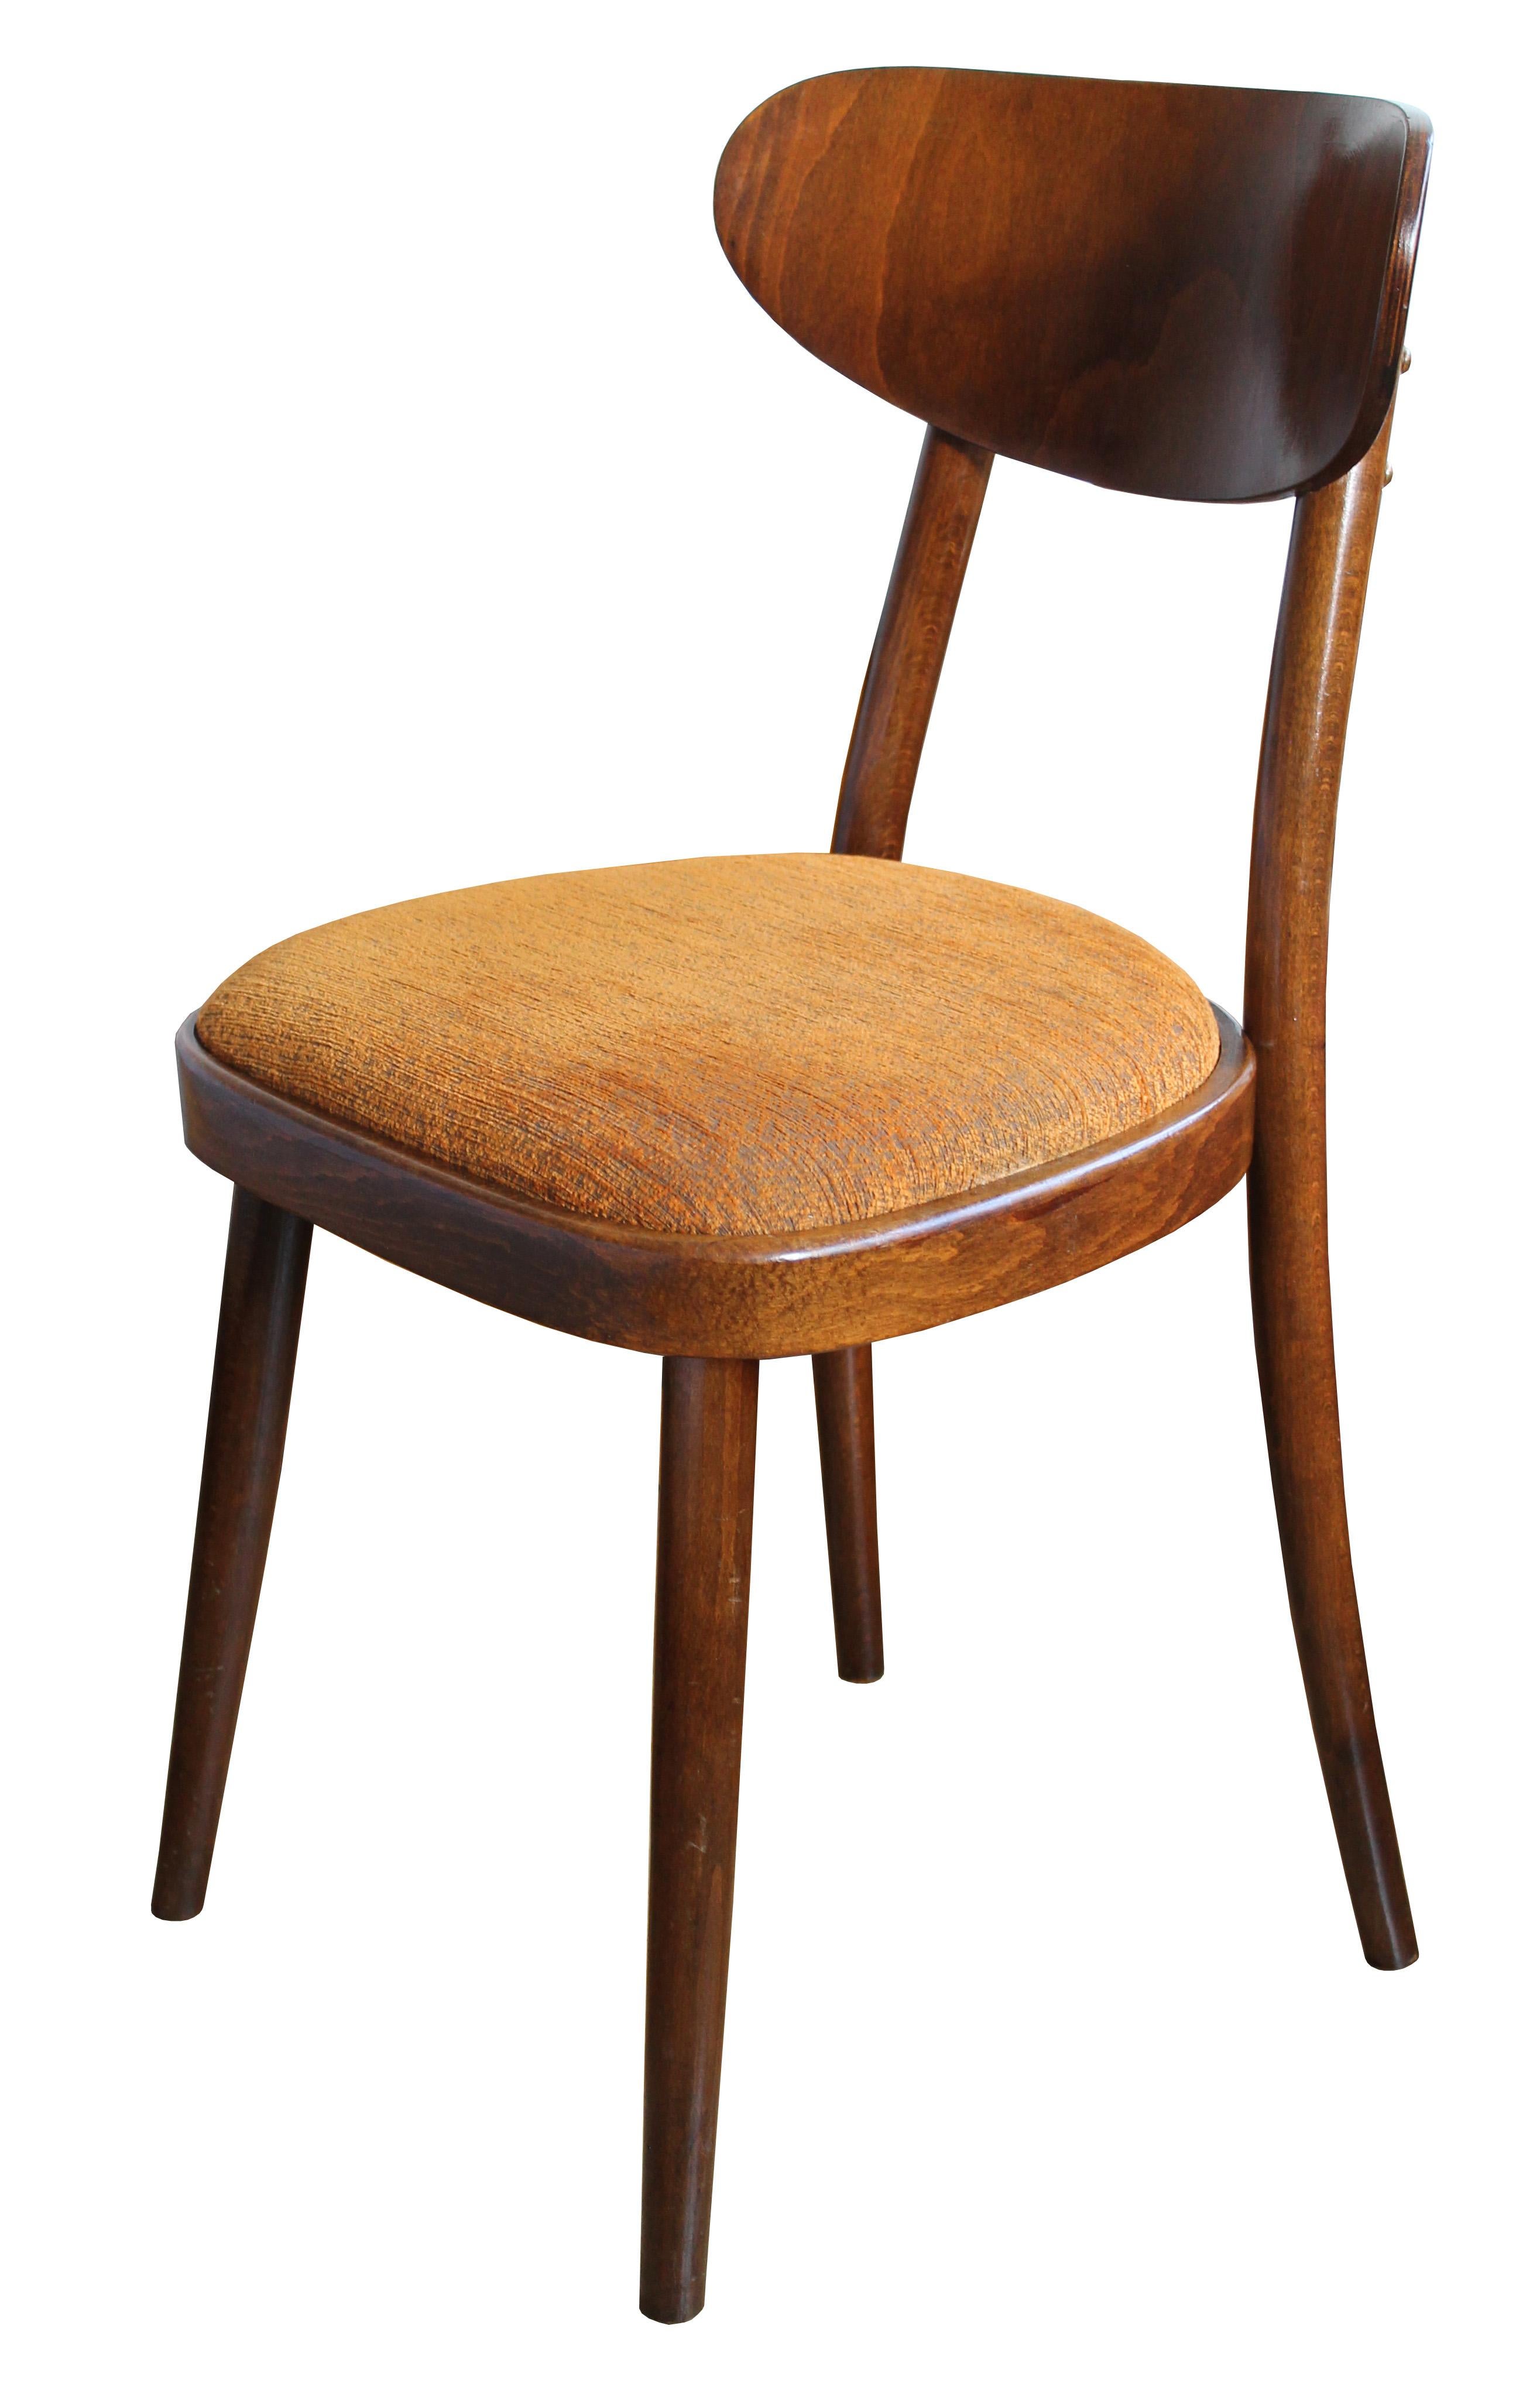 These simple and elegant dining chairs were designed and produced by TON Company in Czechoslovakia. The shape of these chairs is based on the traditional Thonet/TON dining chair. The bentwood backrest however is a typical design aesthetic of the